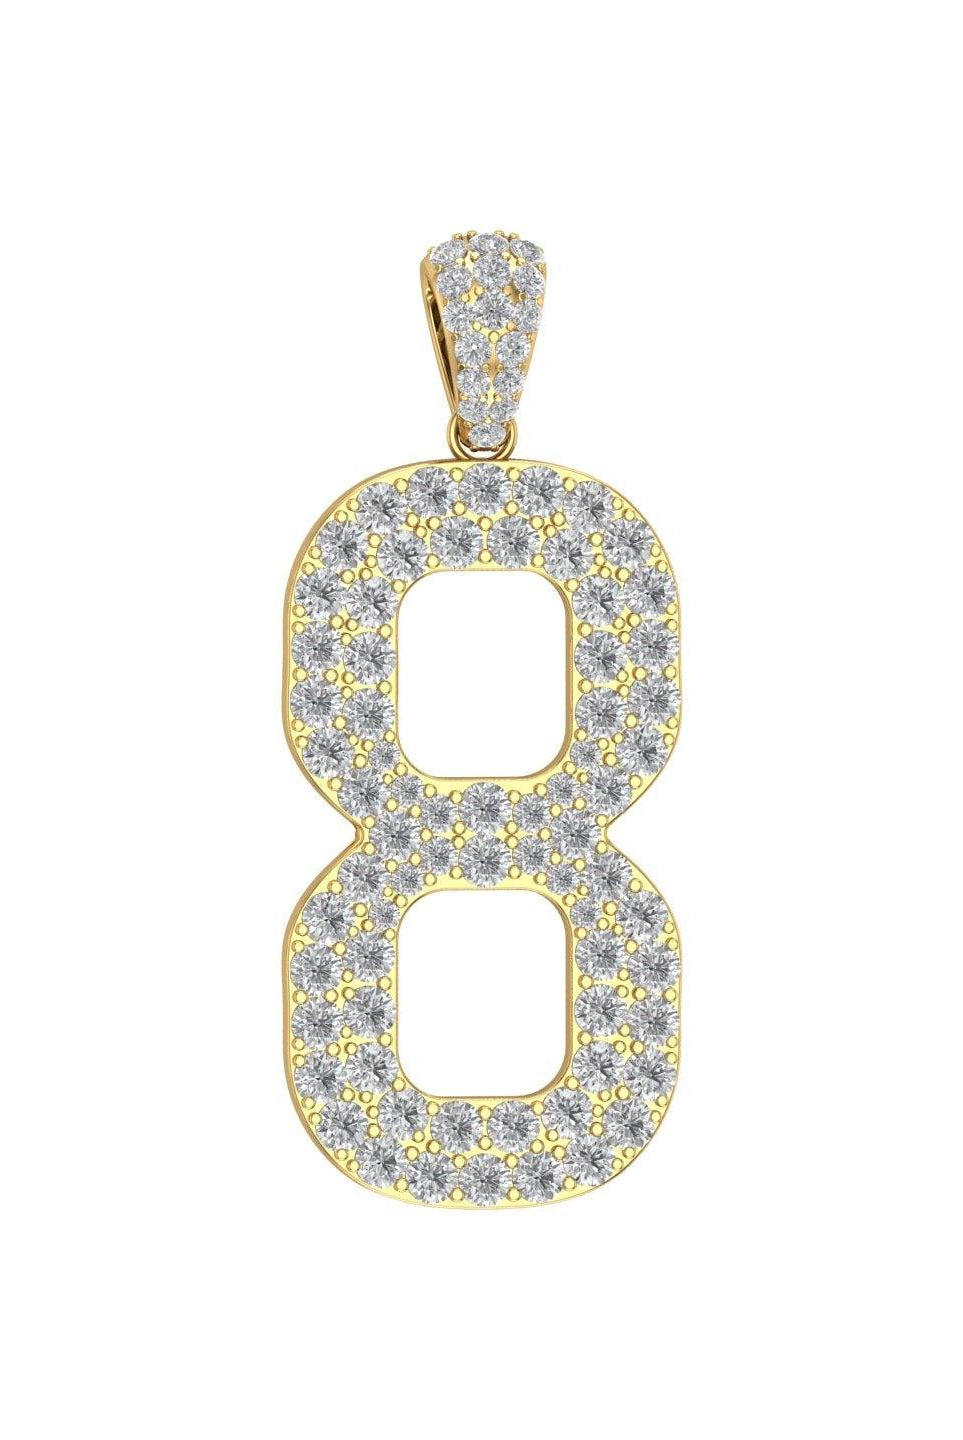 Gold Color Pendant in the Shape of 8 Made of 925 Sterling Silver Material with 20 Inch Long Silver Chain